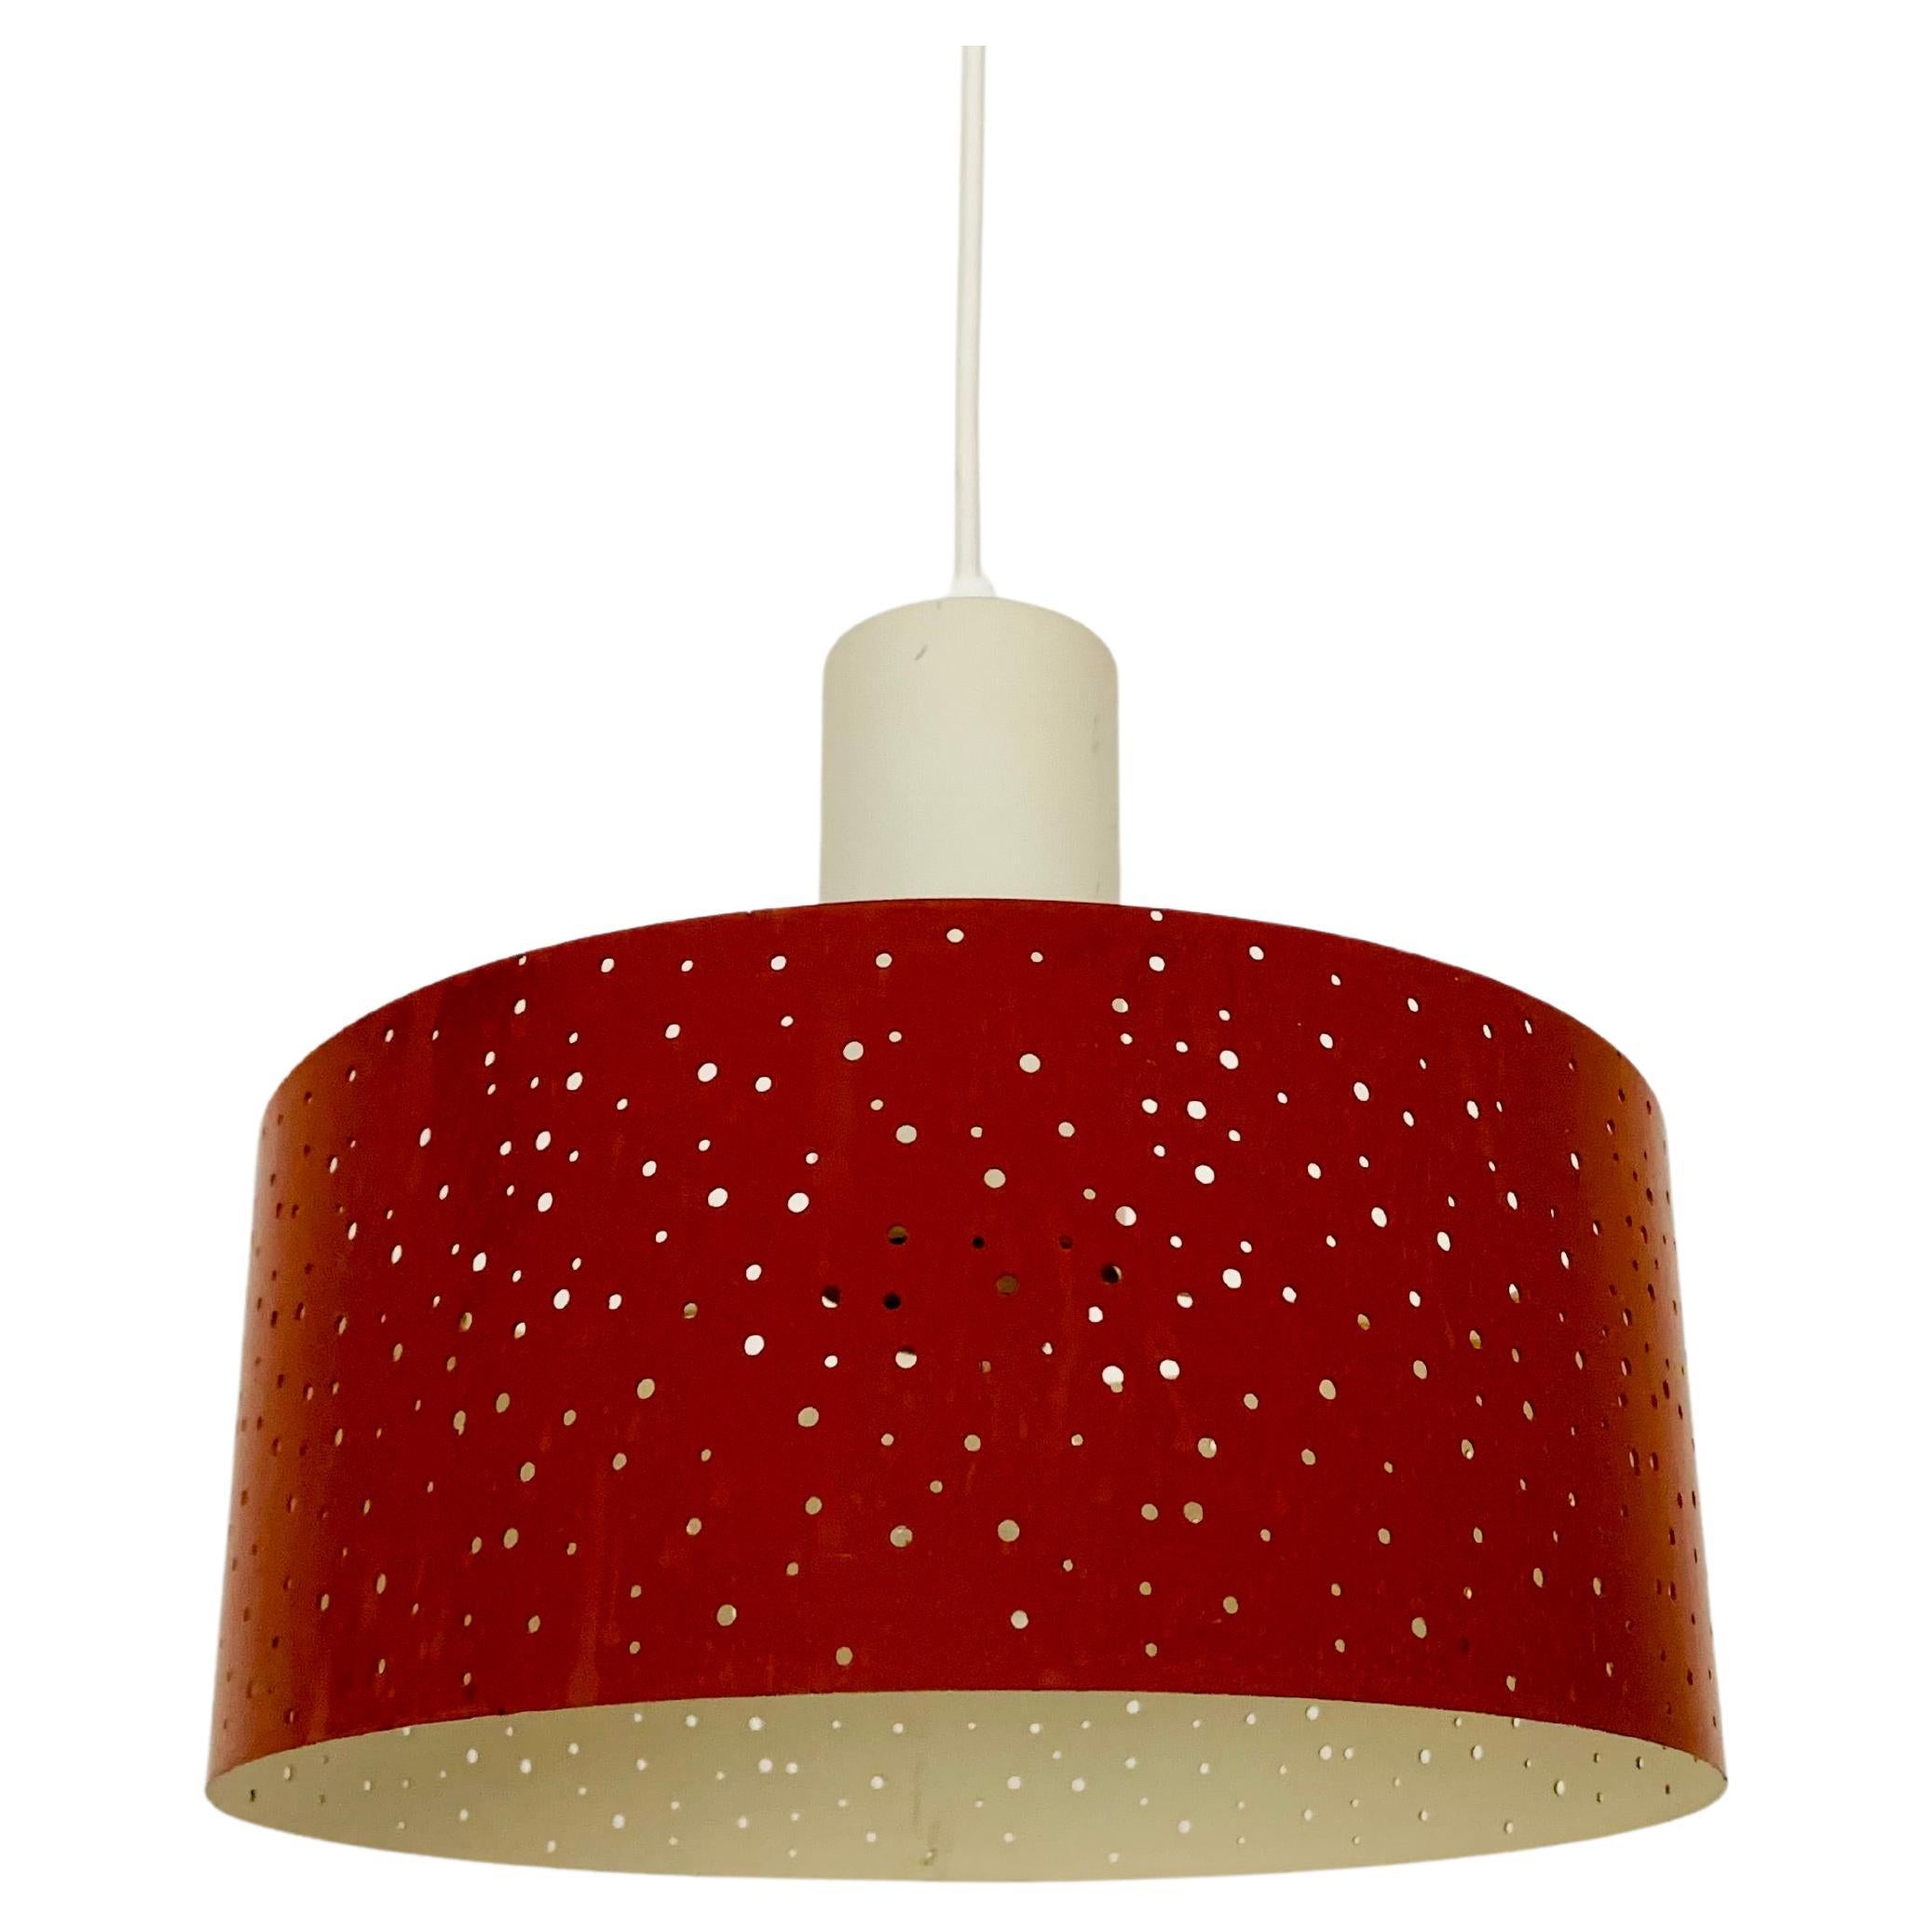 Perforated Metal Pendant Lamp by Ernst Igl for Hillebrand  For Sale